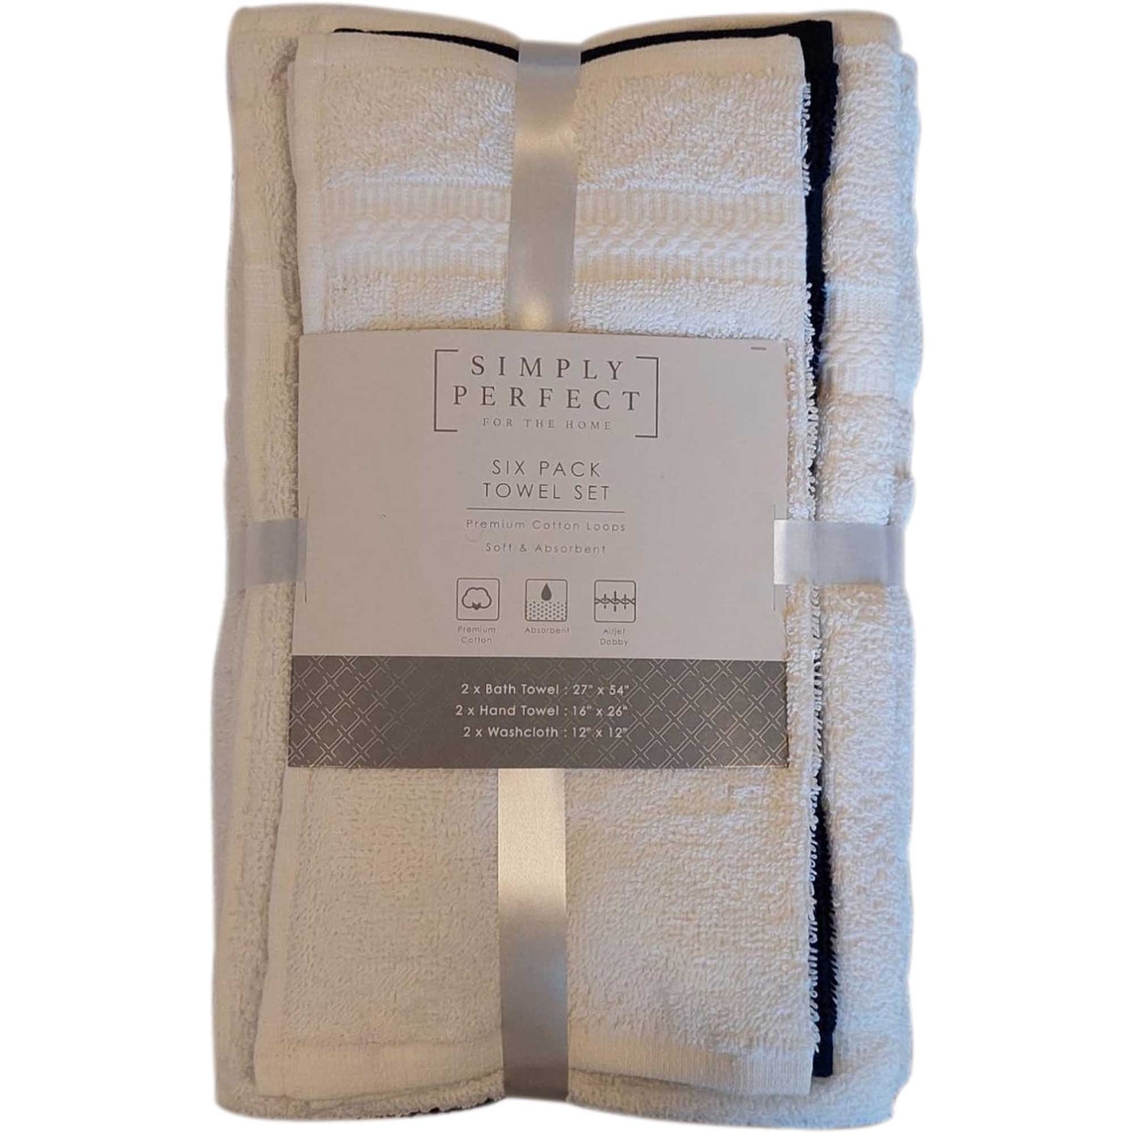 Simply Perfect 6 Piece Towel Sets - Image 2 of 2